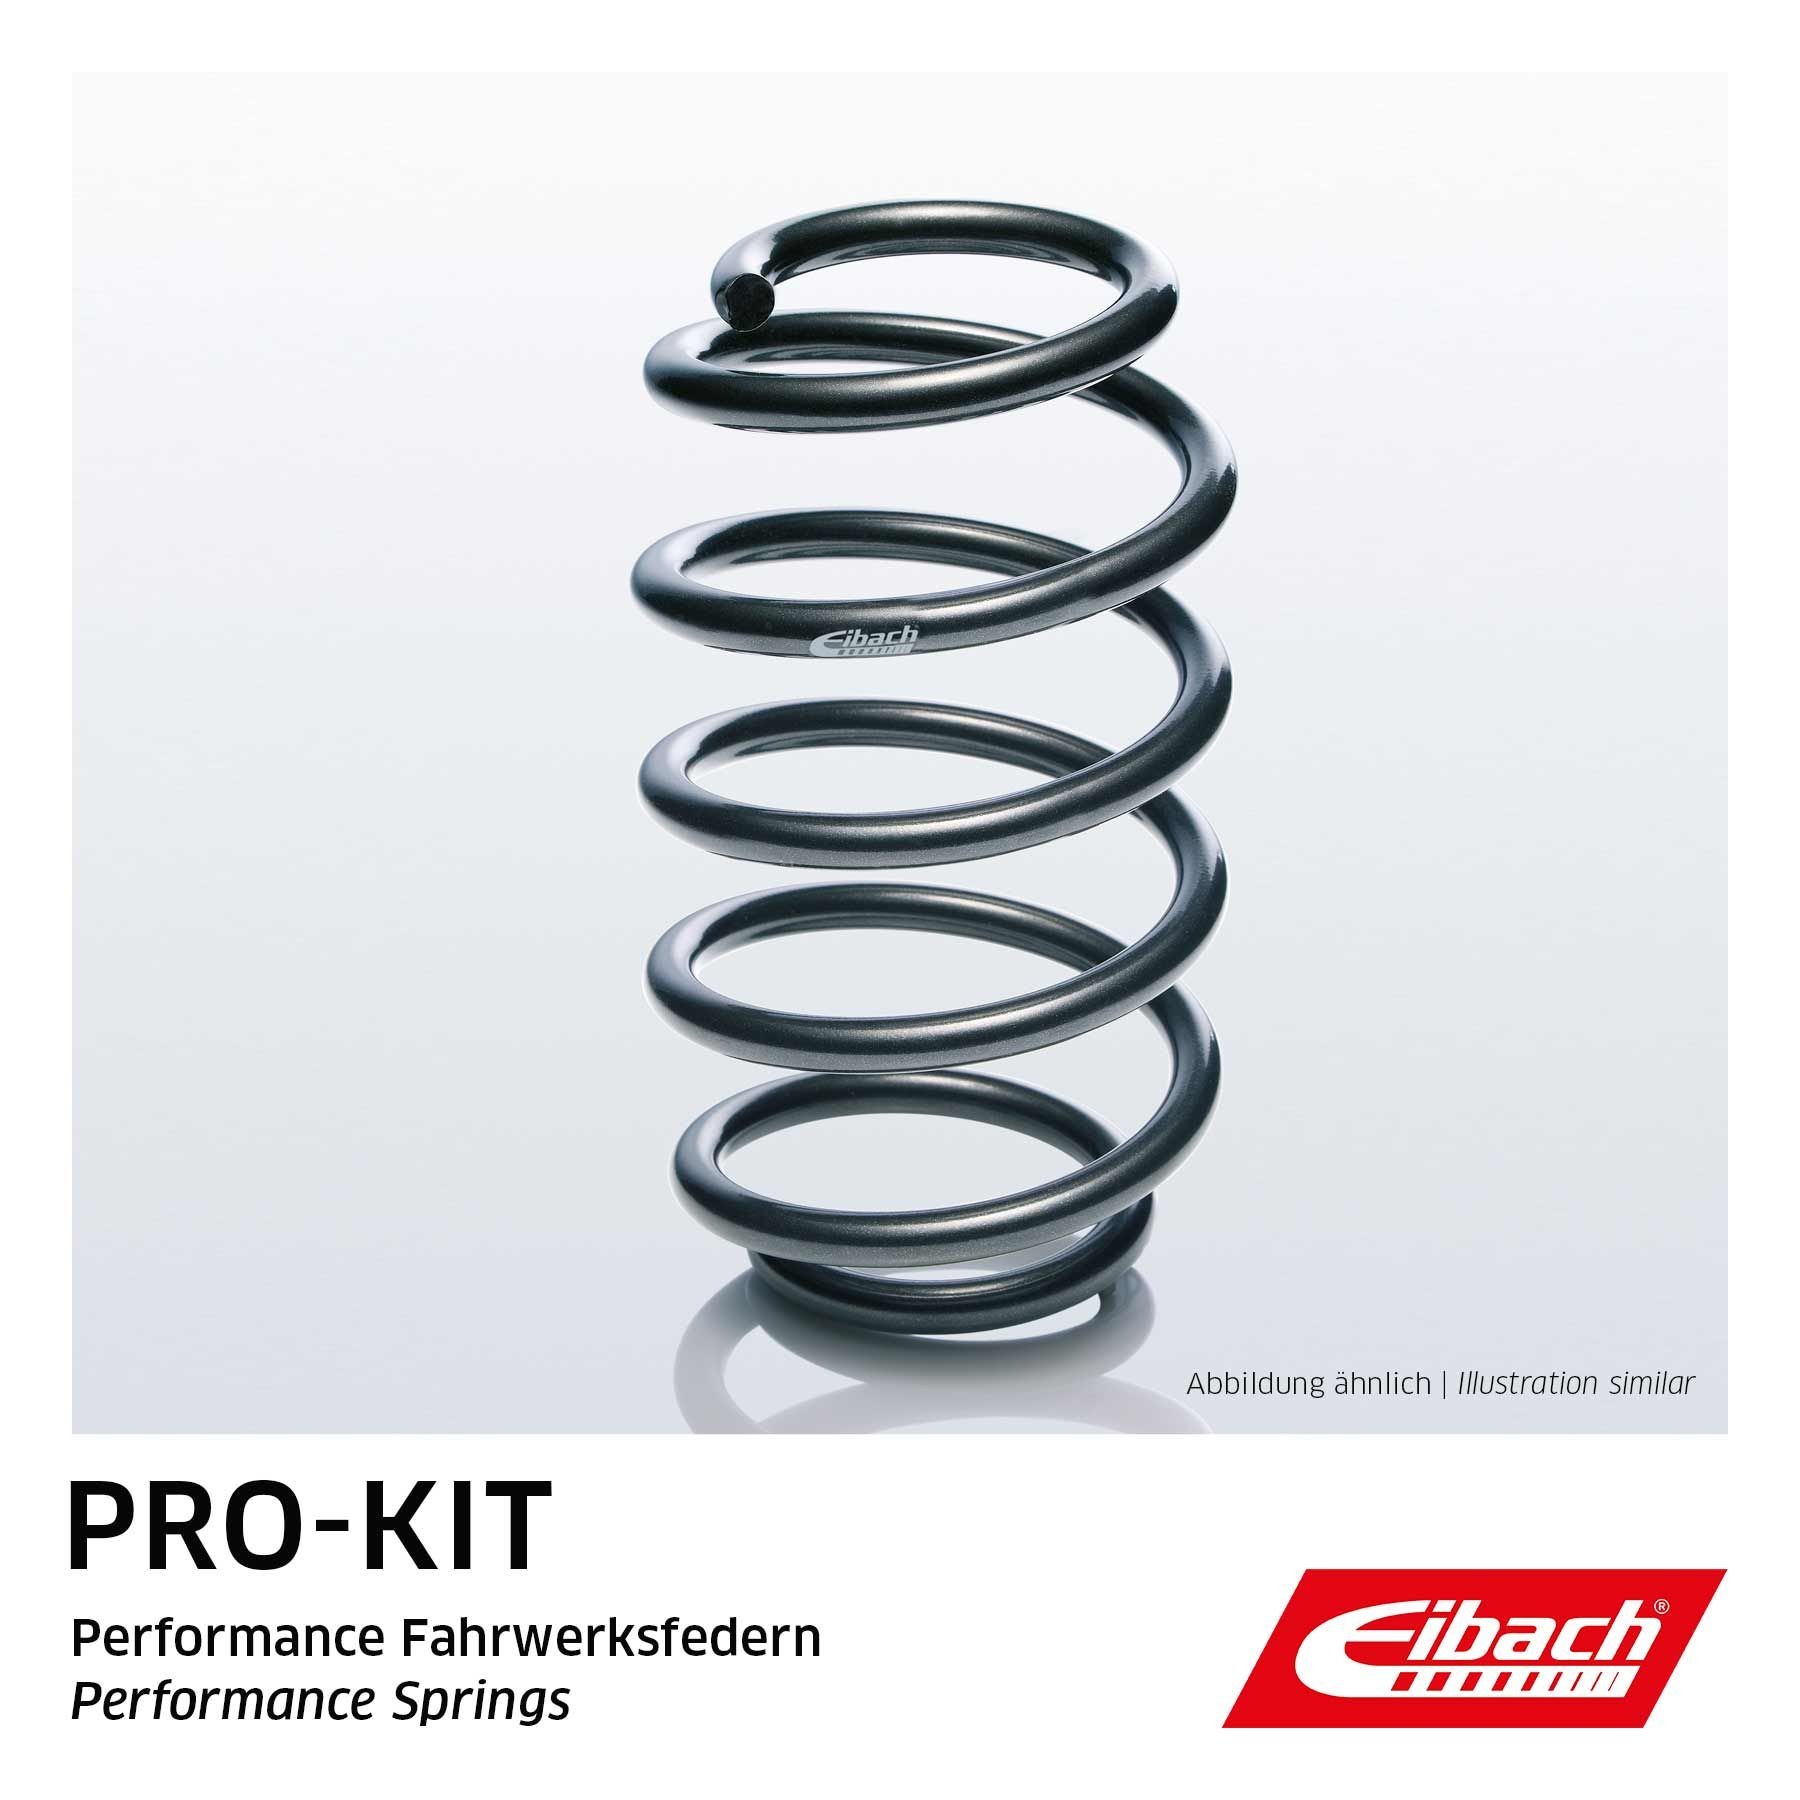 113000104 EIBACH Single Spring Pro-Kit Rear Axle, Coil Spring, for vehicles with sports suspension Length: 296mm Spring F11-30-001-04-HA buy